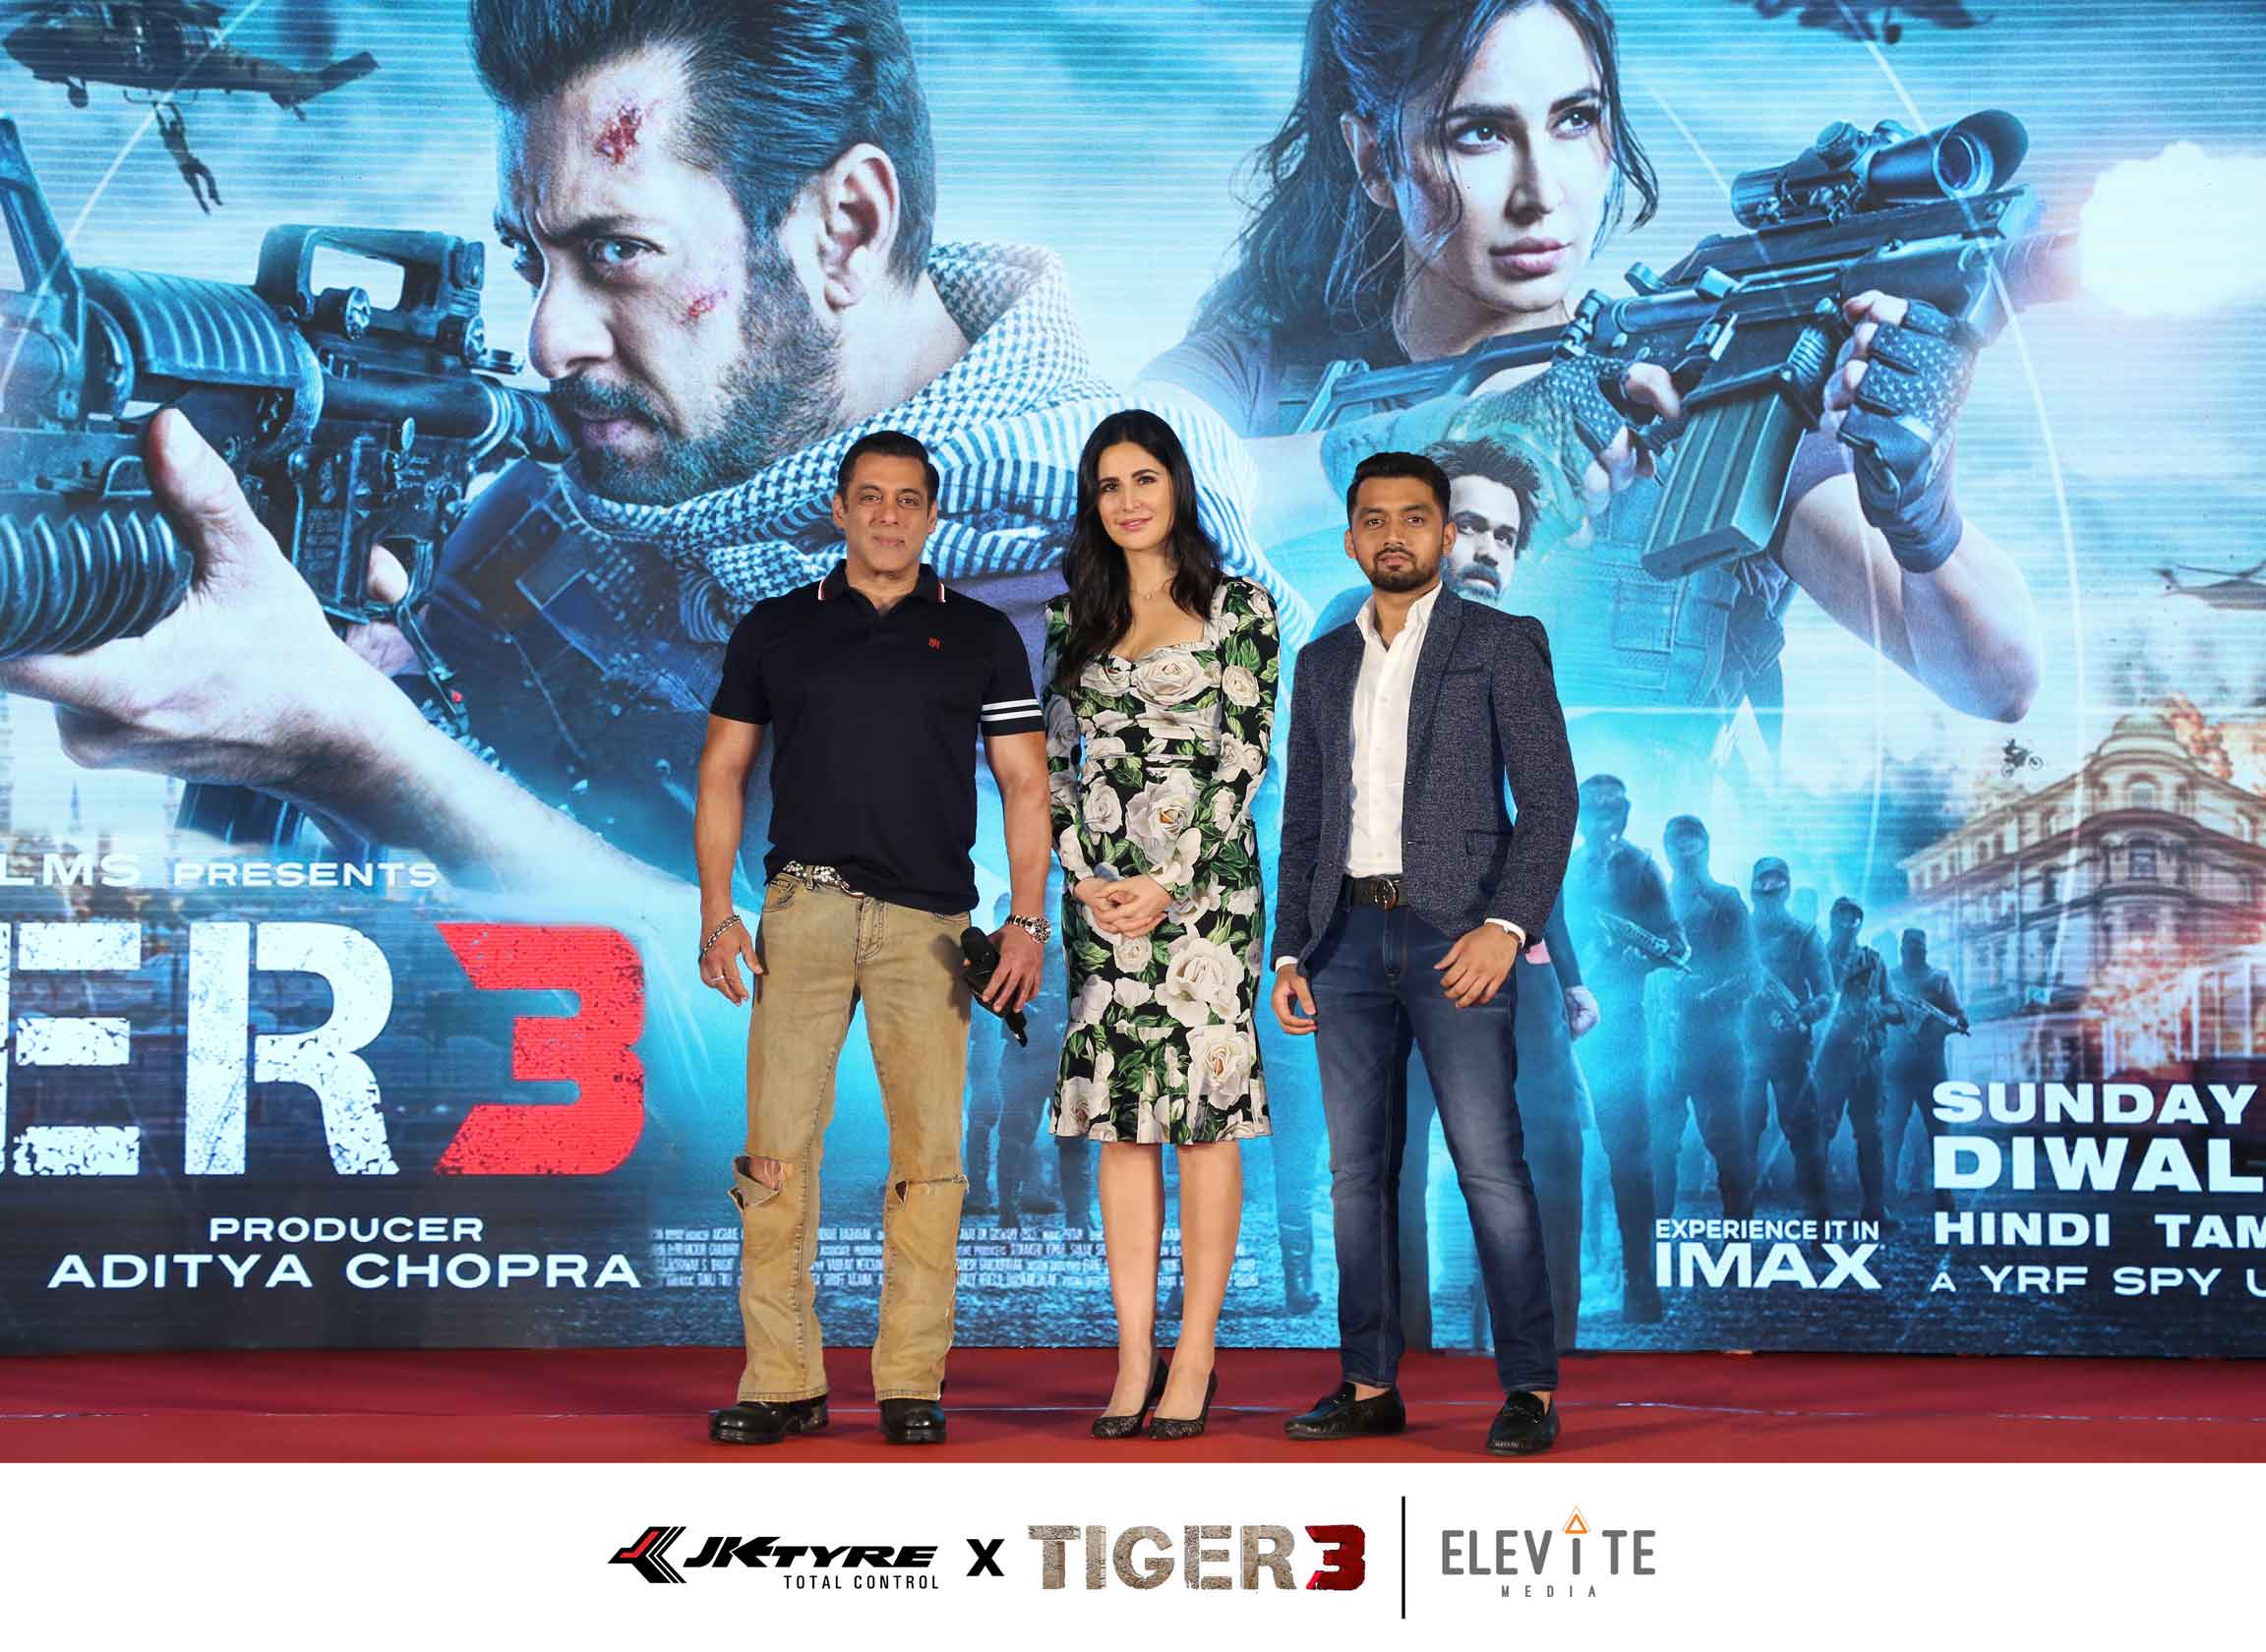 Elevite Media Announces Exciting Collaboration with JK Tyre for Co-branding with Bollywood Blockbuster Tiger